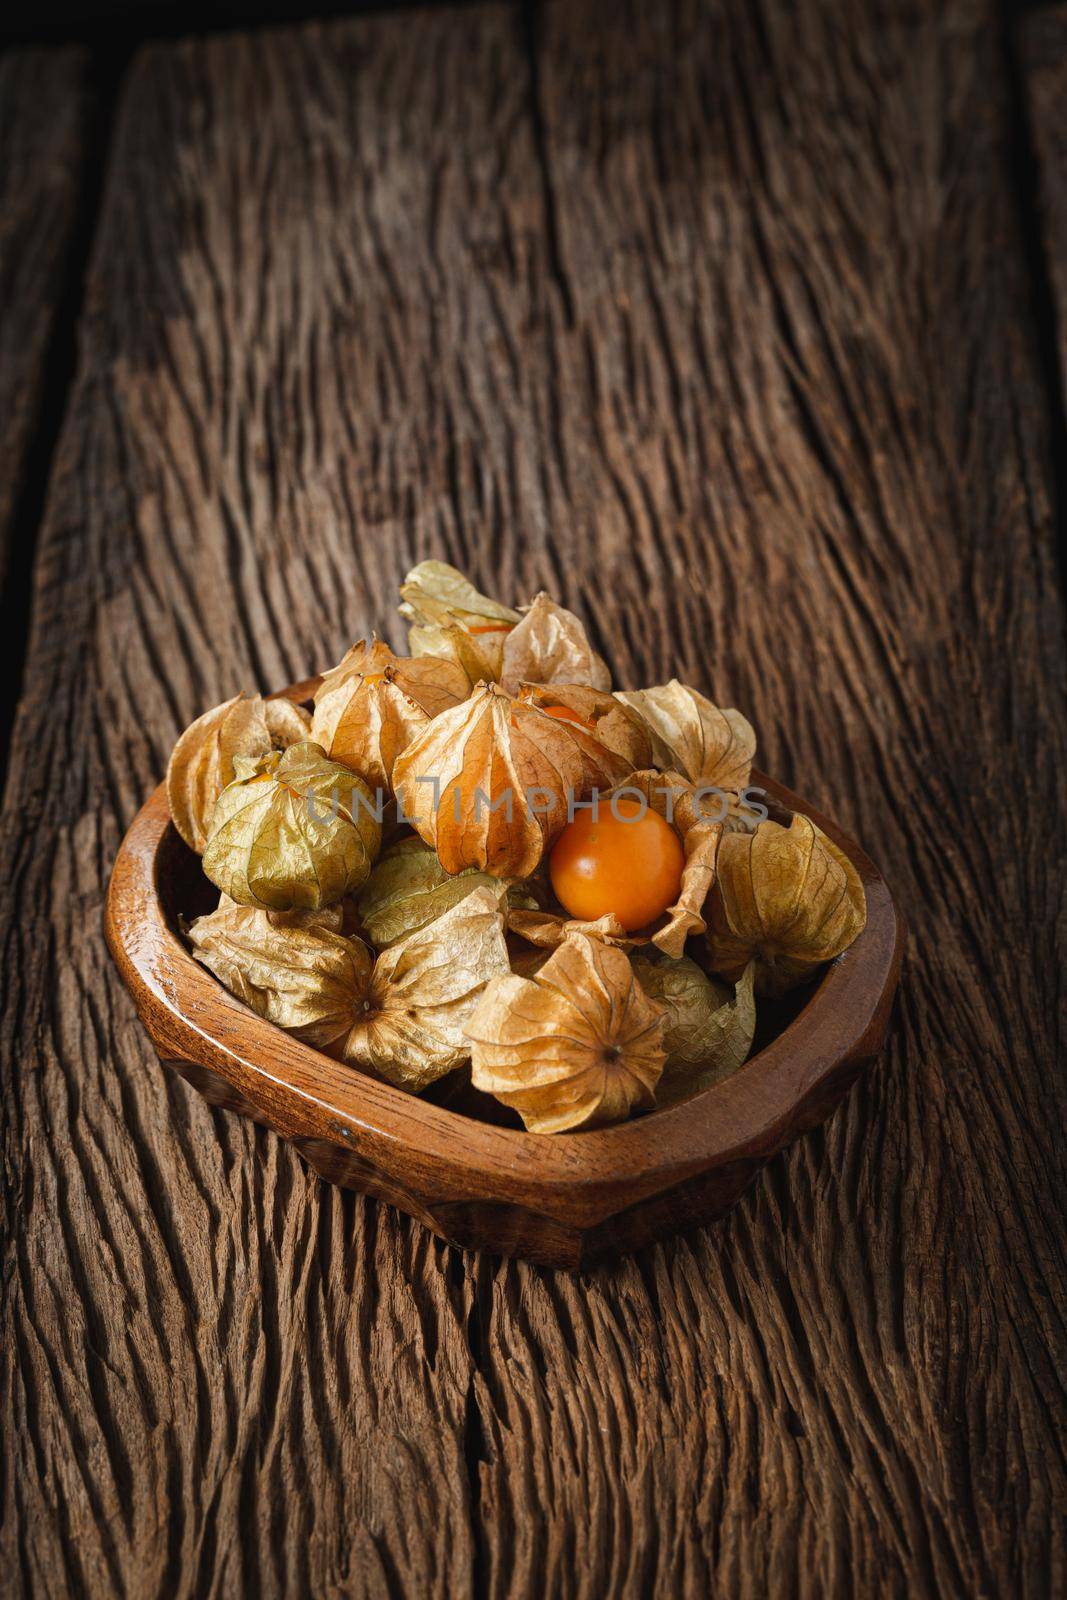 Cape Gooseberries Group by Wasant